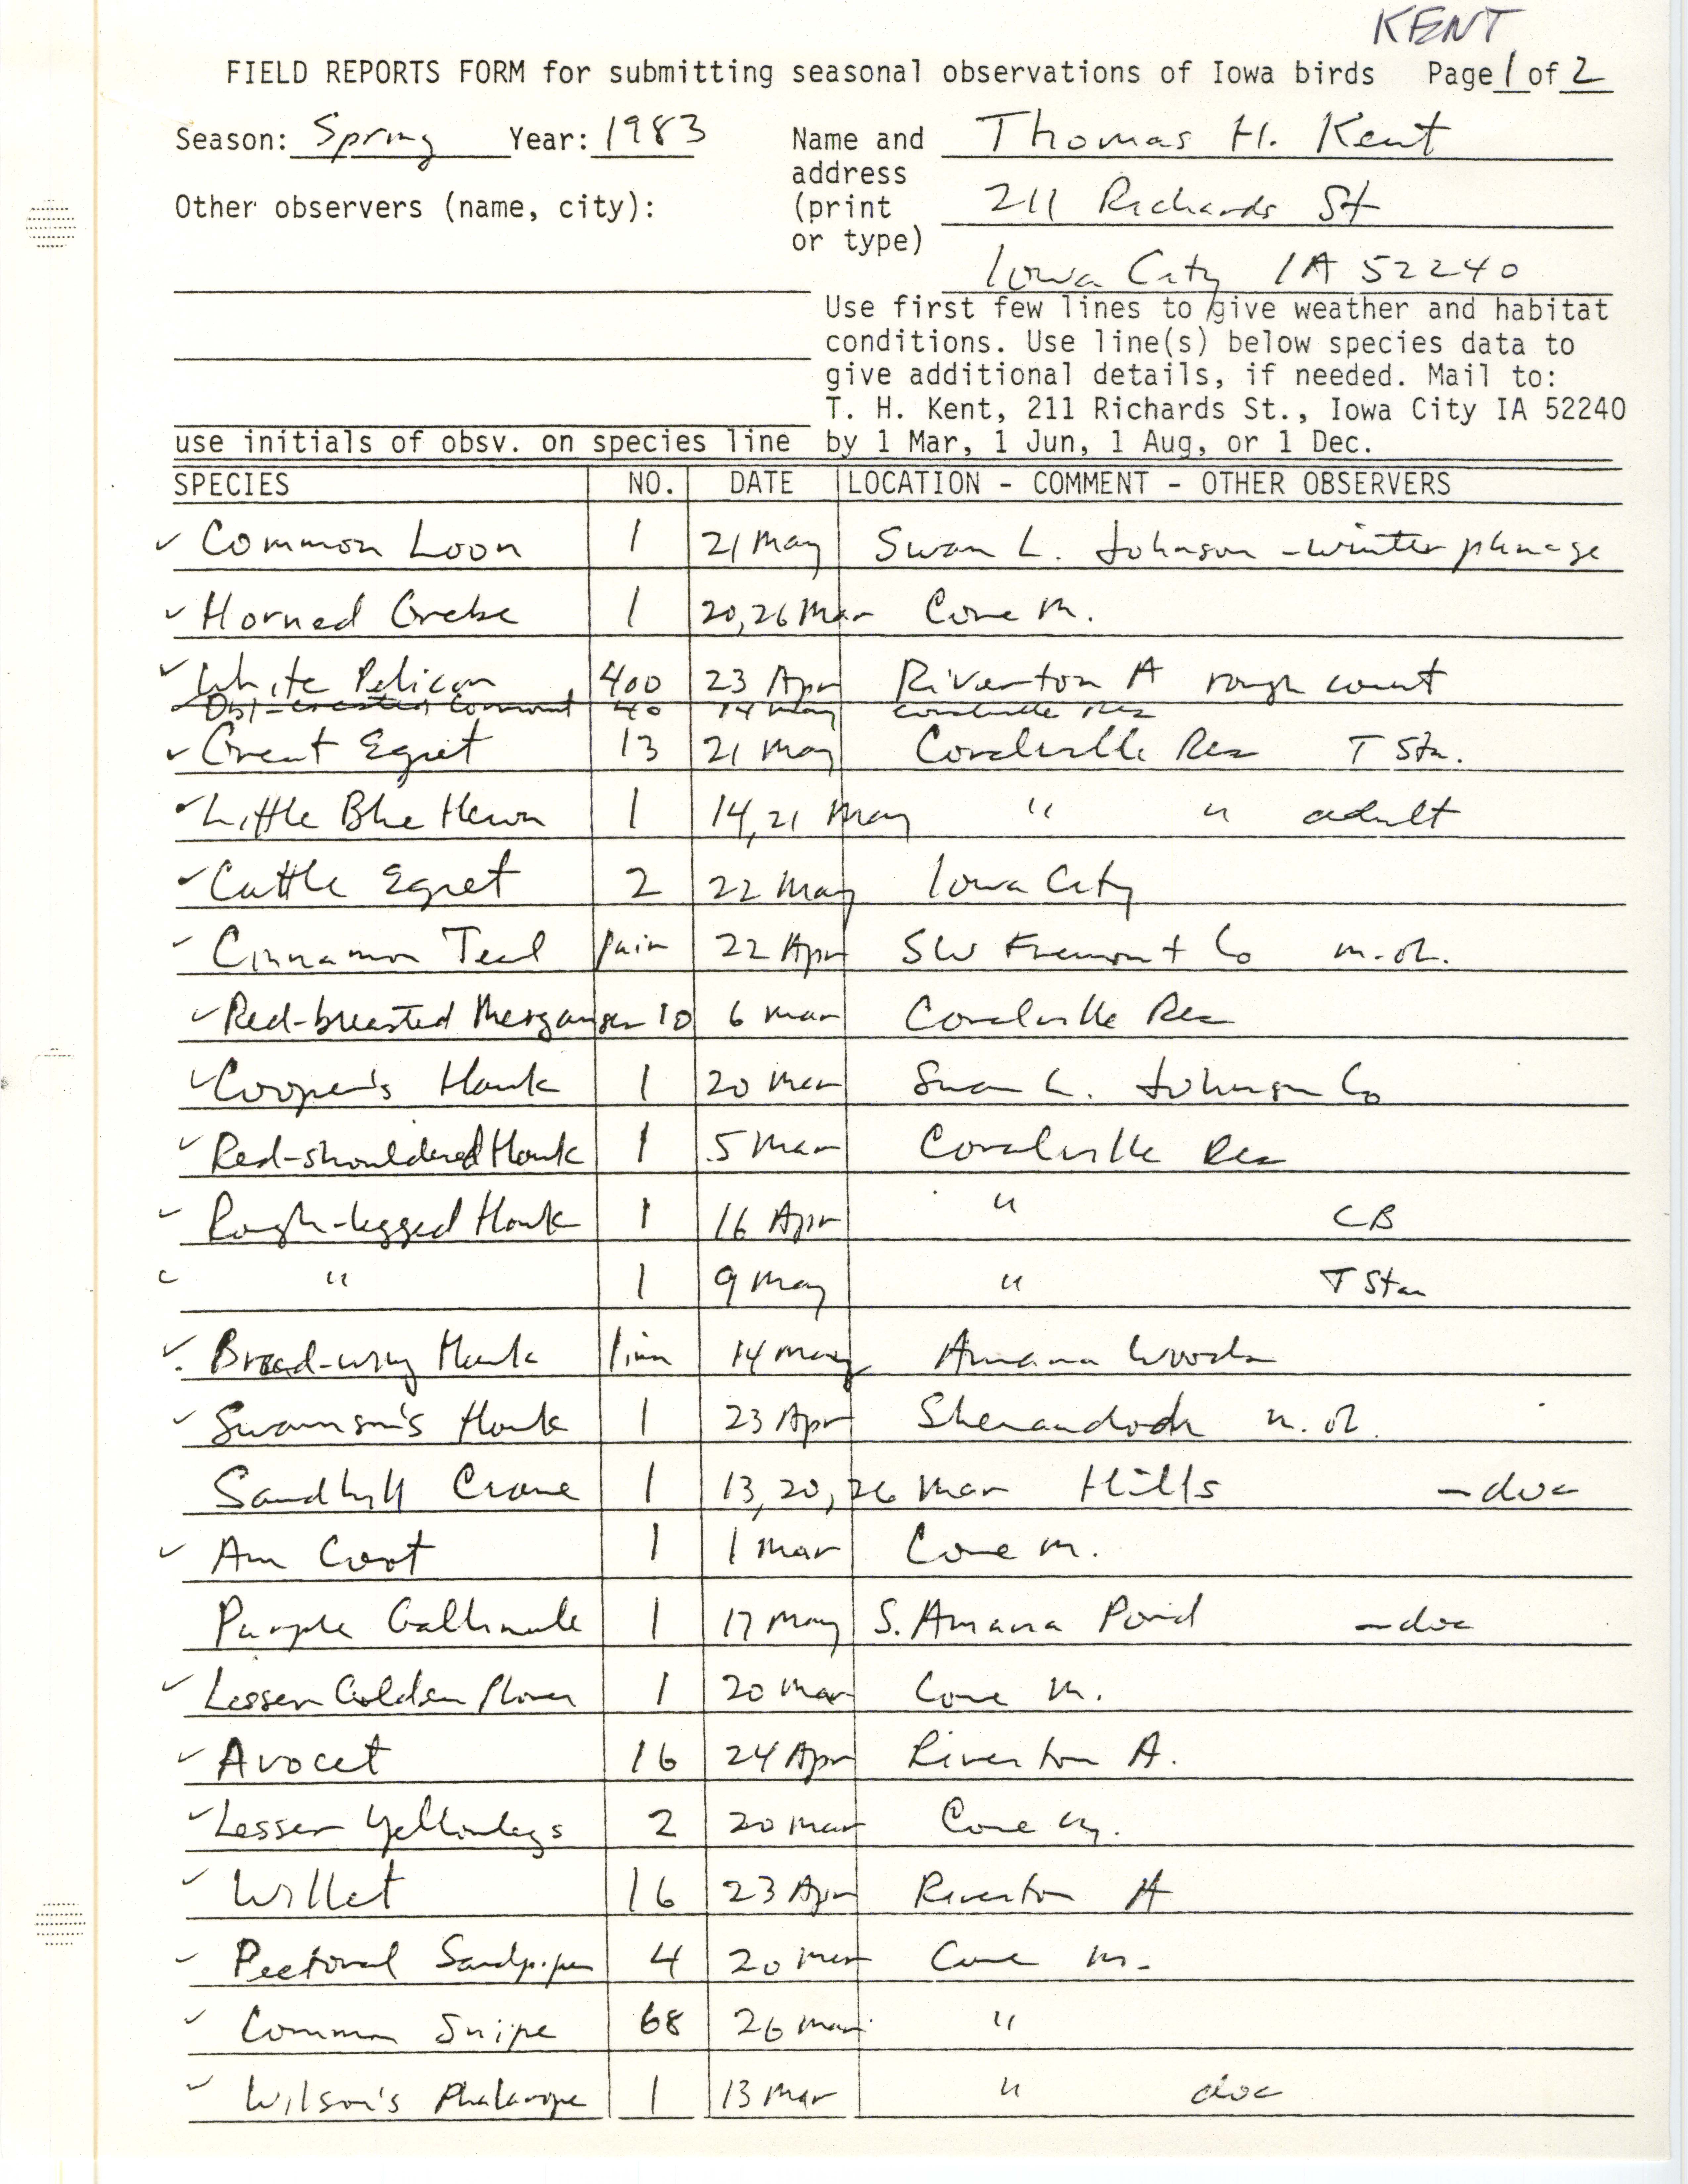 Field reports form for submitting seasonal observations of Iowa birds, Thomas H. Kent, spring 1983